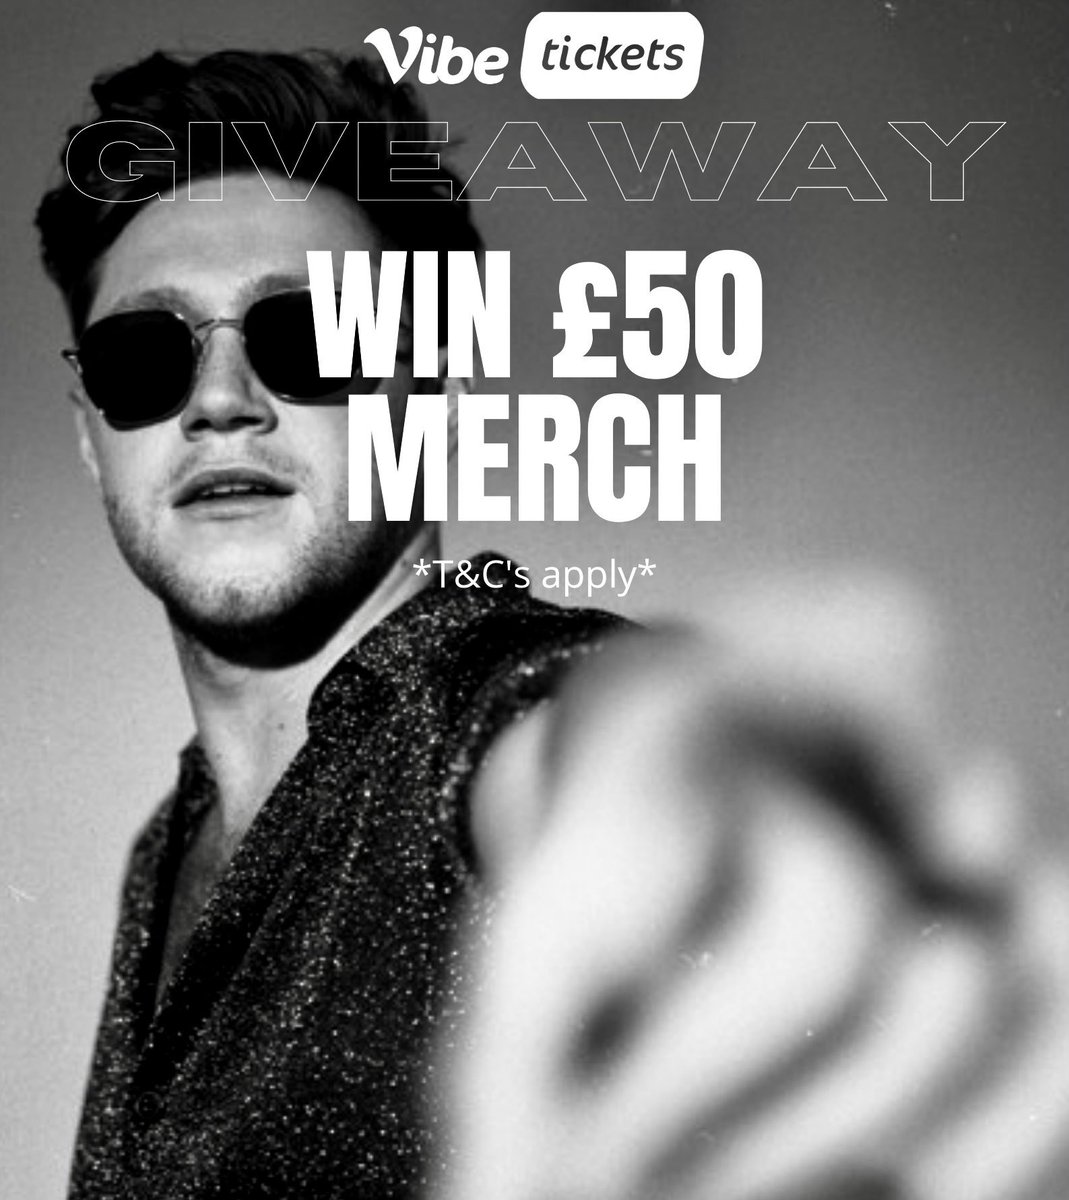 💸 NIALL HORAN GIVEAWAY 💸 We have partnered up with Vibe Tickets to giveaway £50 worth of @NiallOfficial merch! To enter: - RT this tweet - Follow @VibeTickets, @VibePay and us This is an international giveaway and ends on October 20th, 5PM (UK). Good luck!